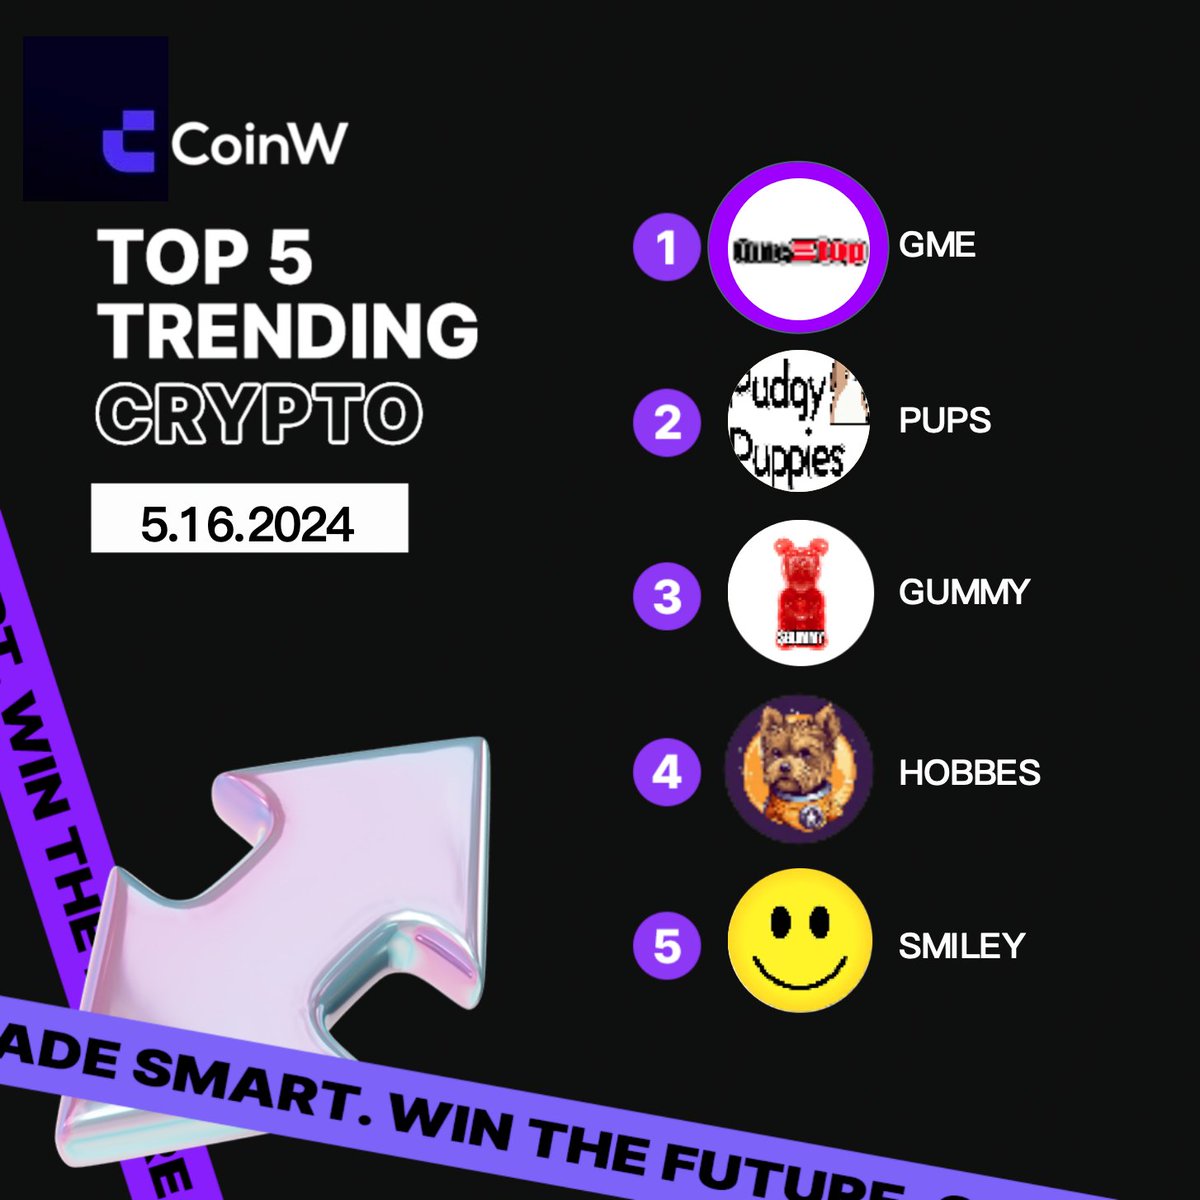 Our Top 5 Trending #Crypto chart: $GME, $PUPS, $GUMMY, $HOBBES, and $SMILEY are making waves! 🌊 What's on your trading radar today? Share your picks! 👇